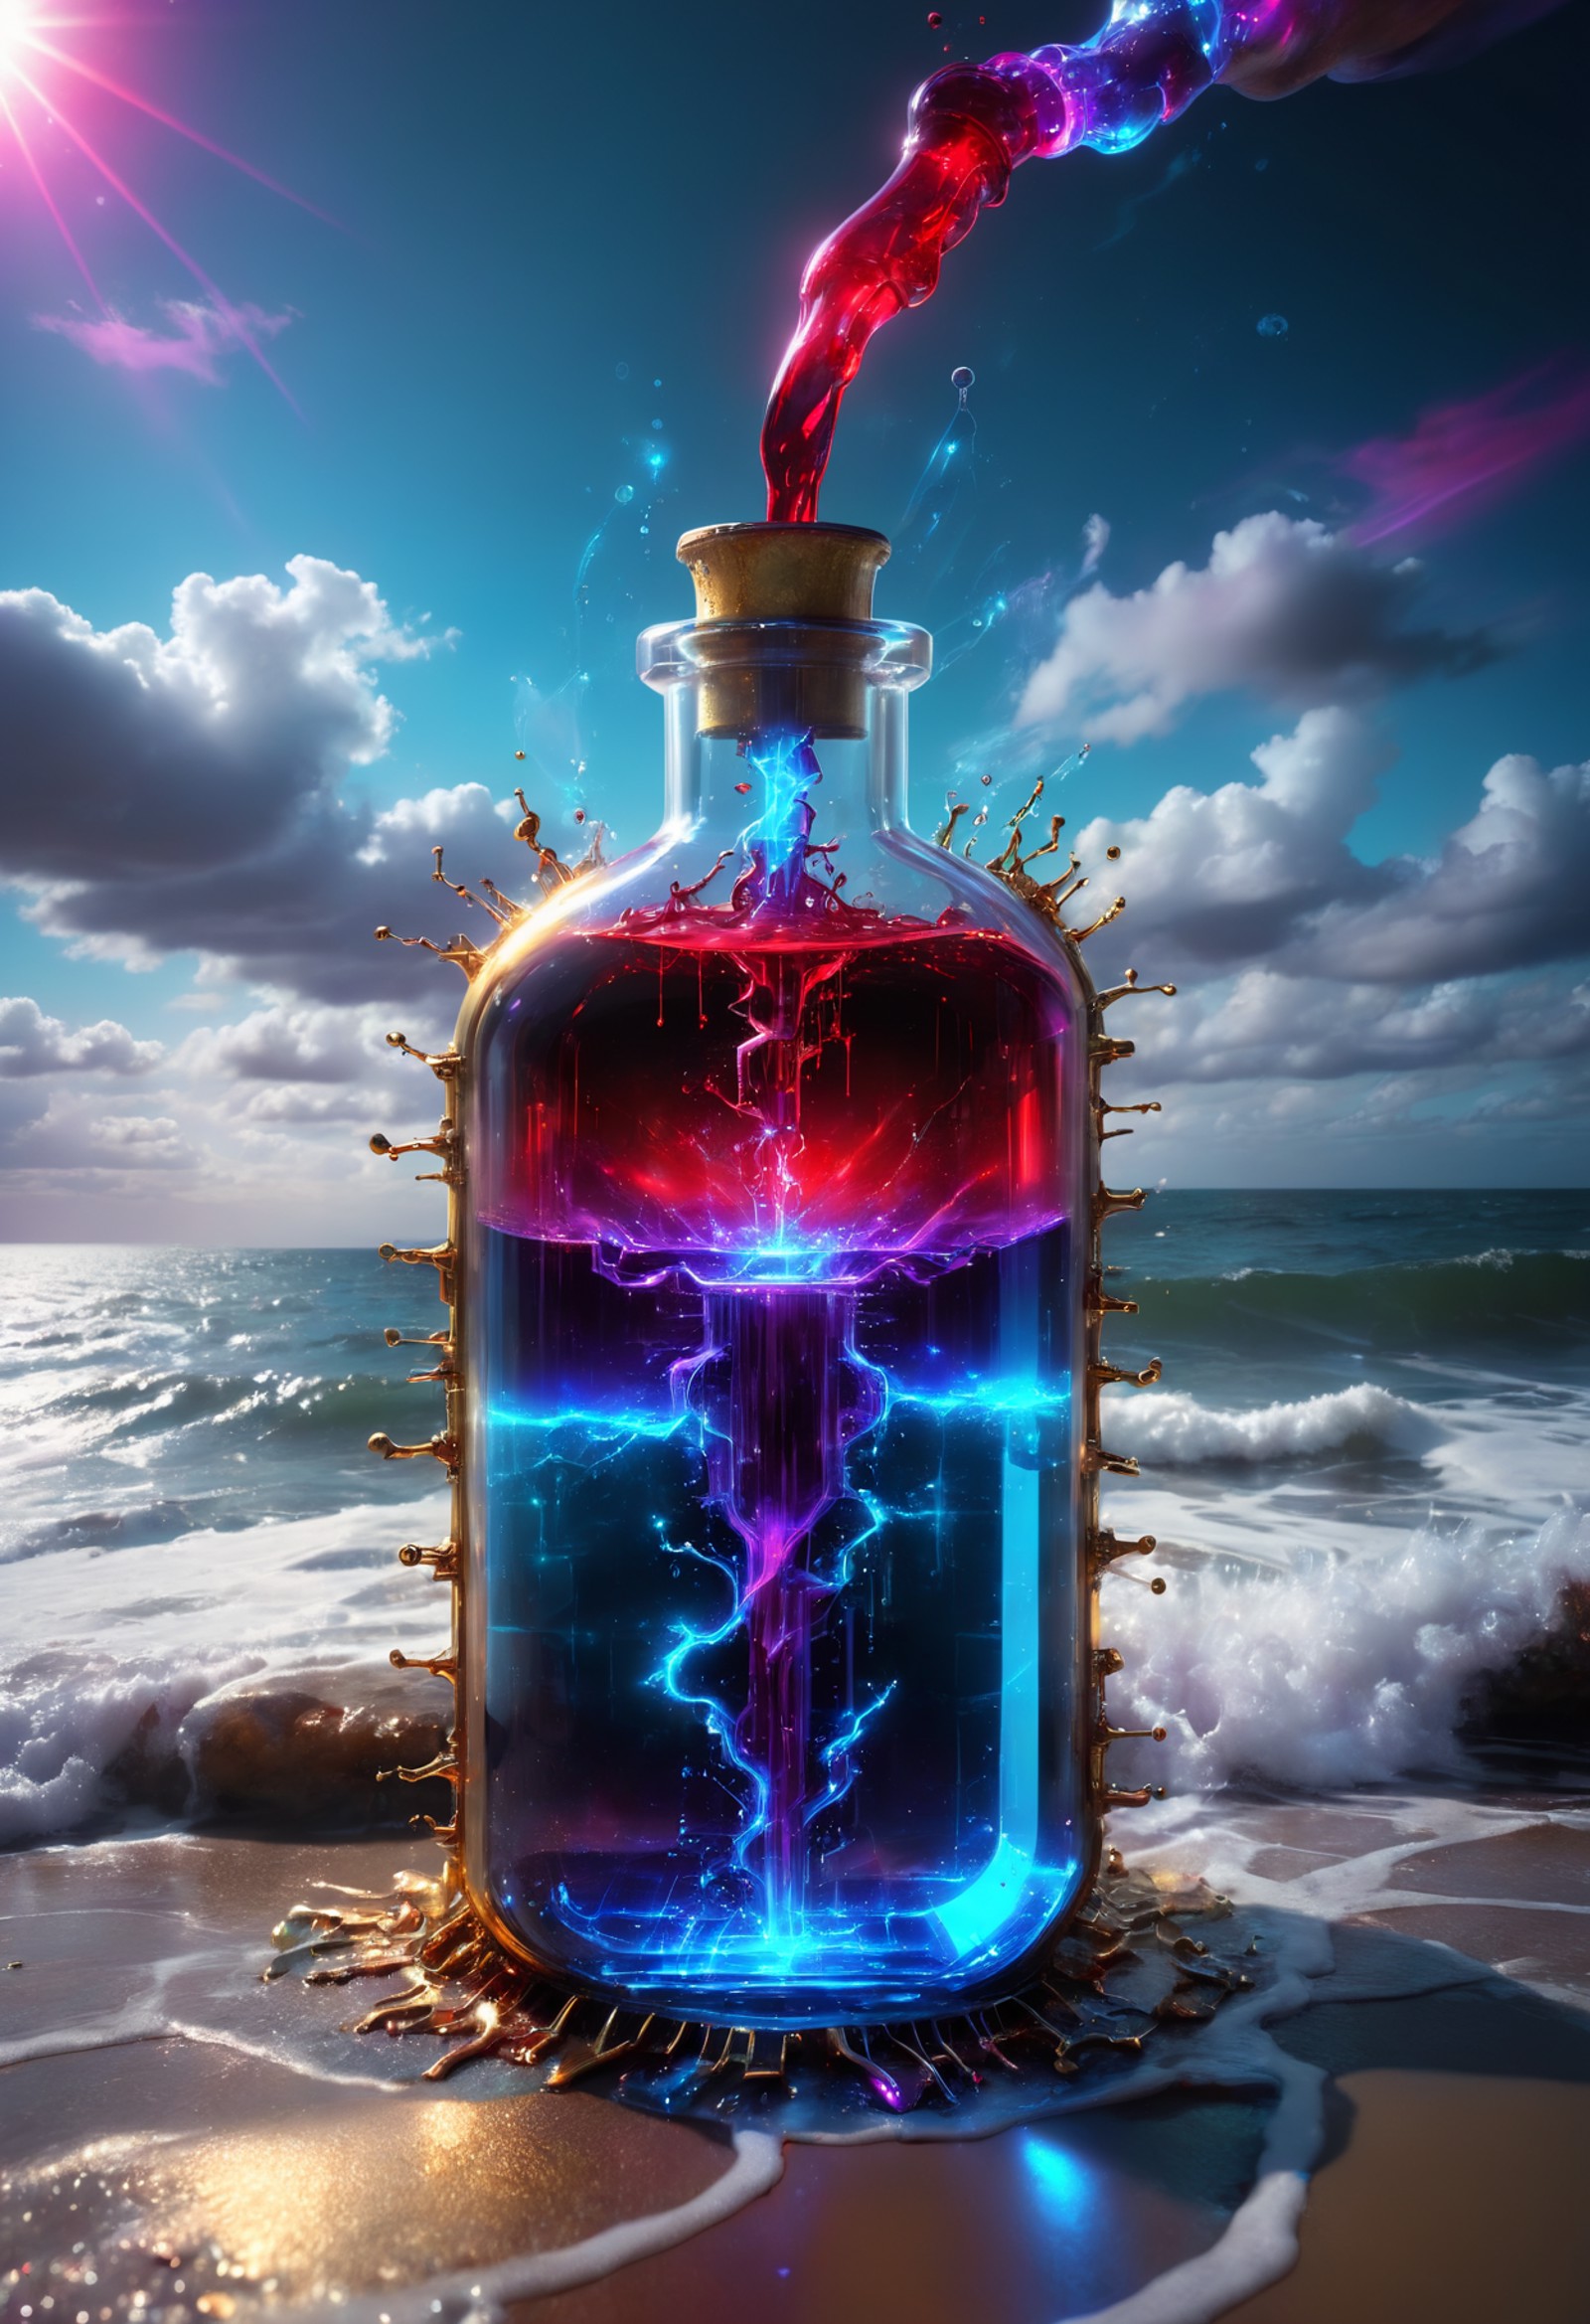 iccircuitart,red, purple , sky blue theme,highly detailed image of a magical potion bottle leaking out into the ocean, del...